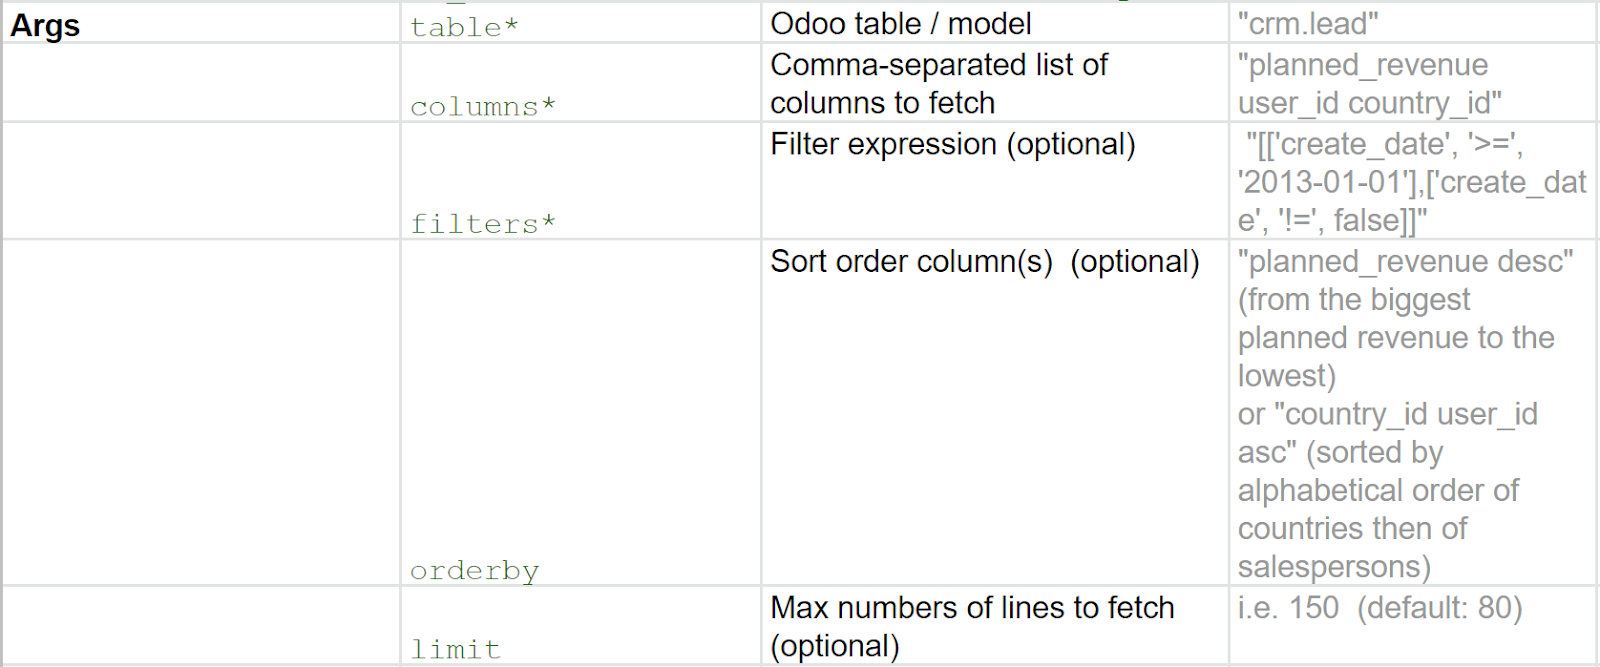 Table with examples of arguments to use in Flectra